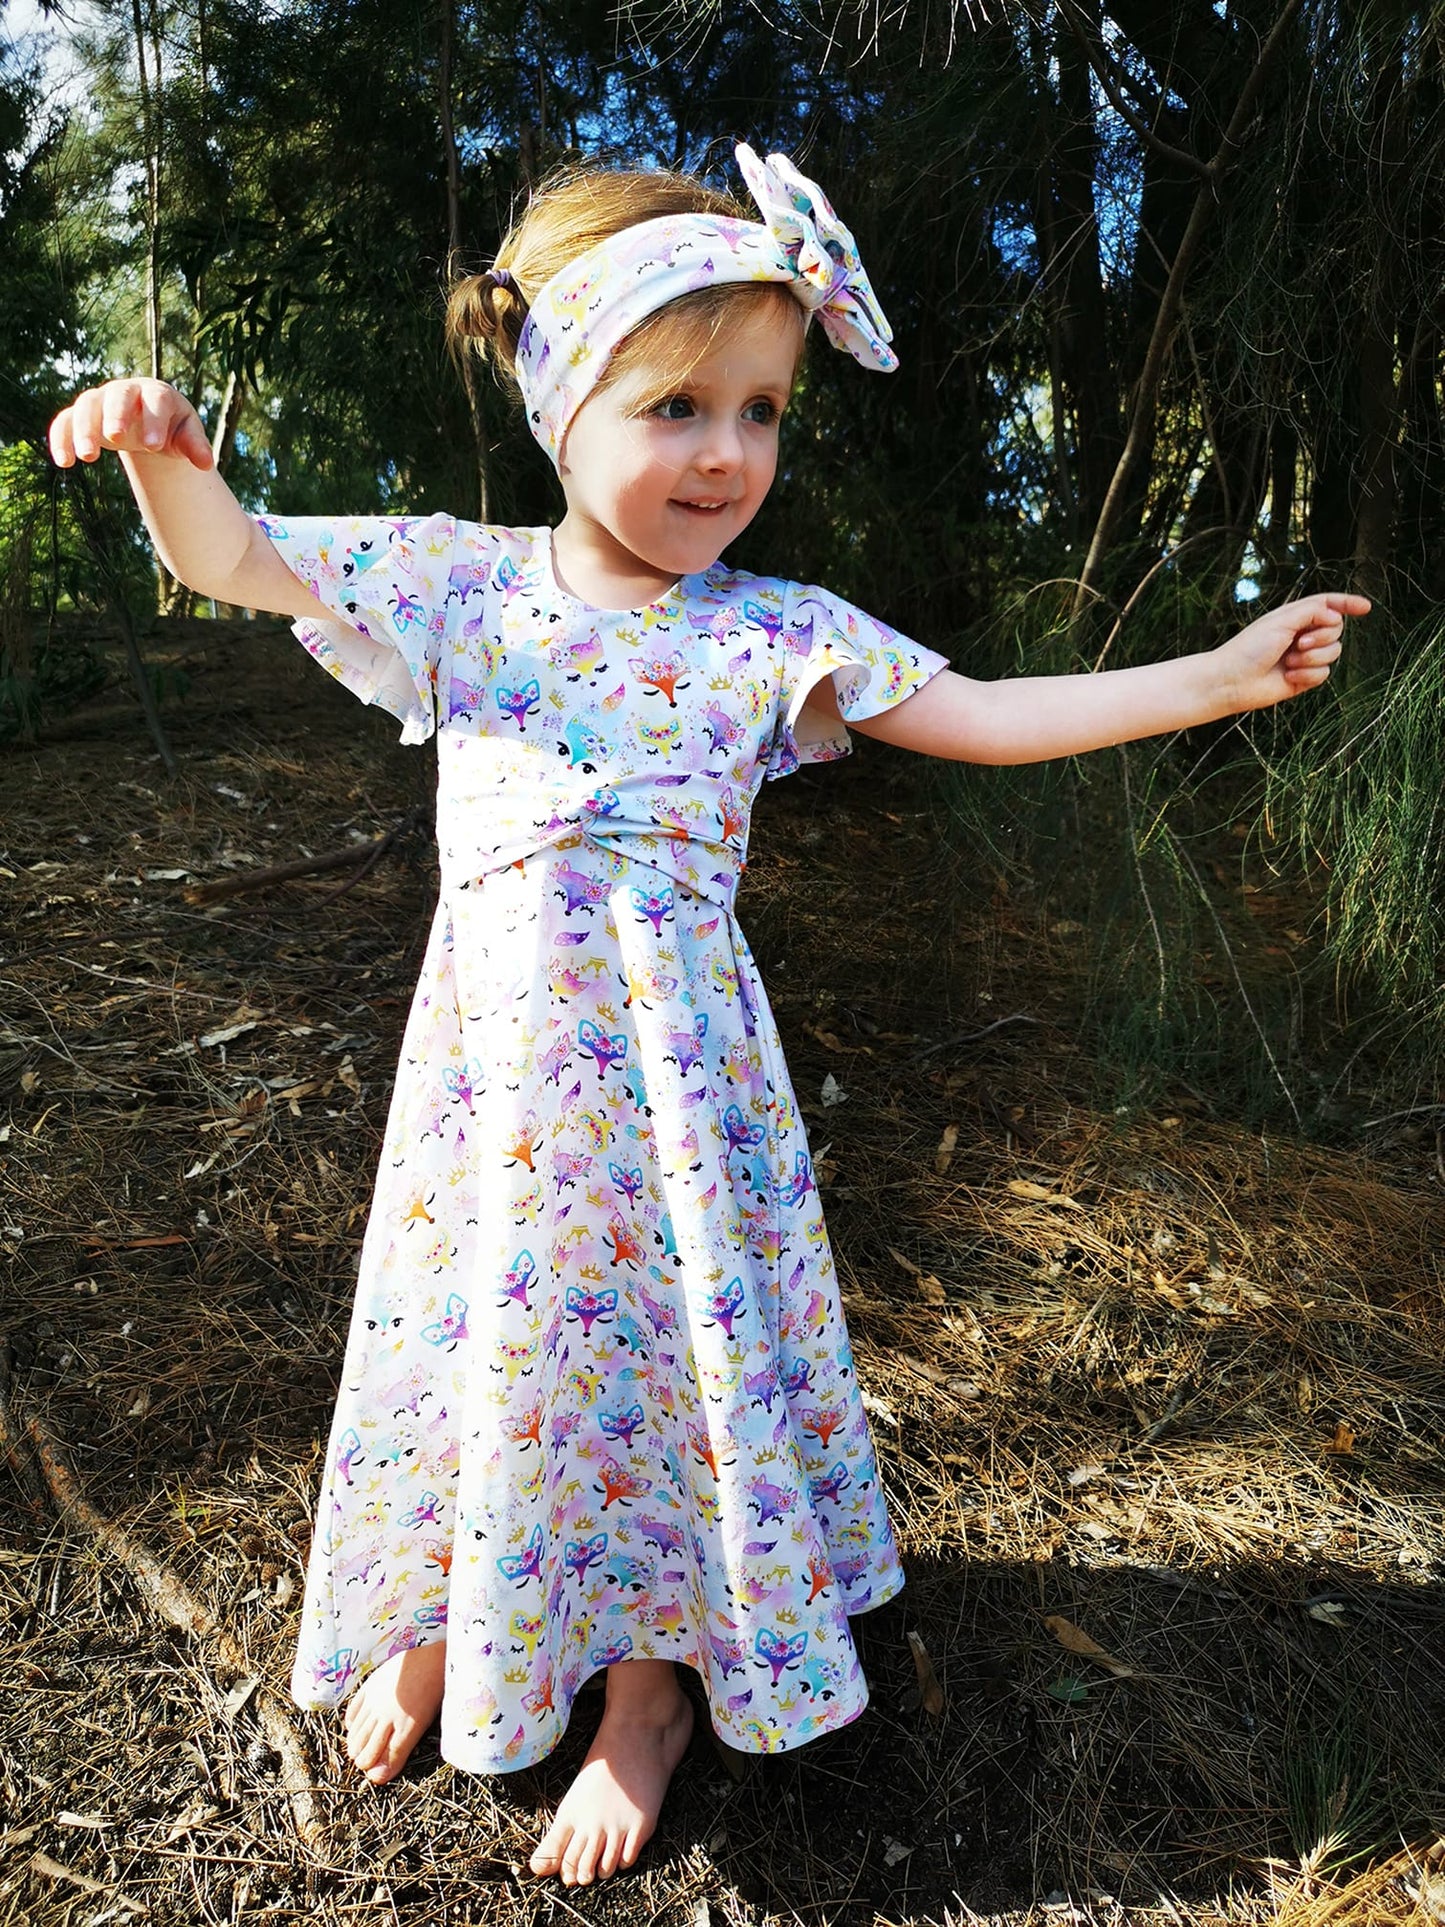 Vale's Corset Gown Sizes 2T to 14 Kids and Dolls PDF Pattern